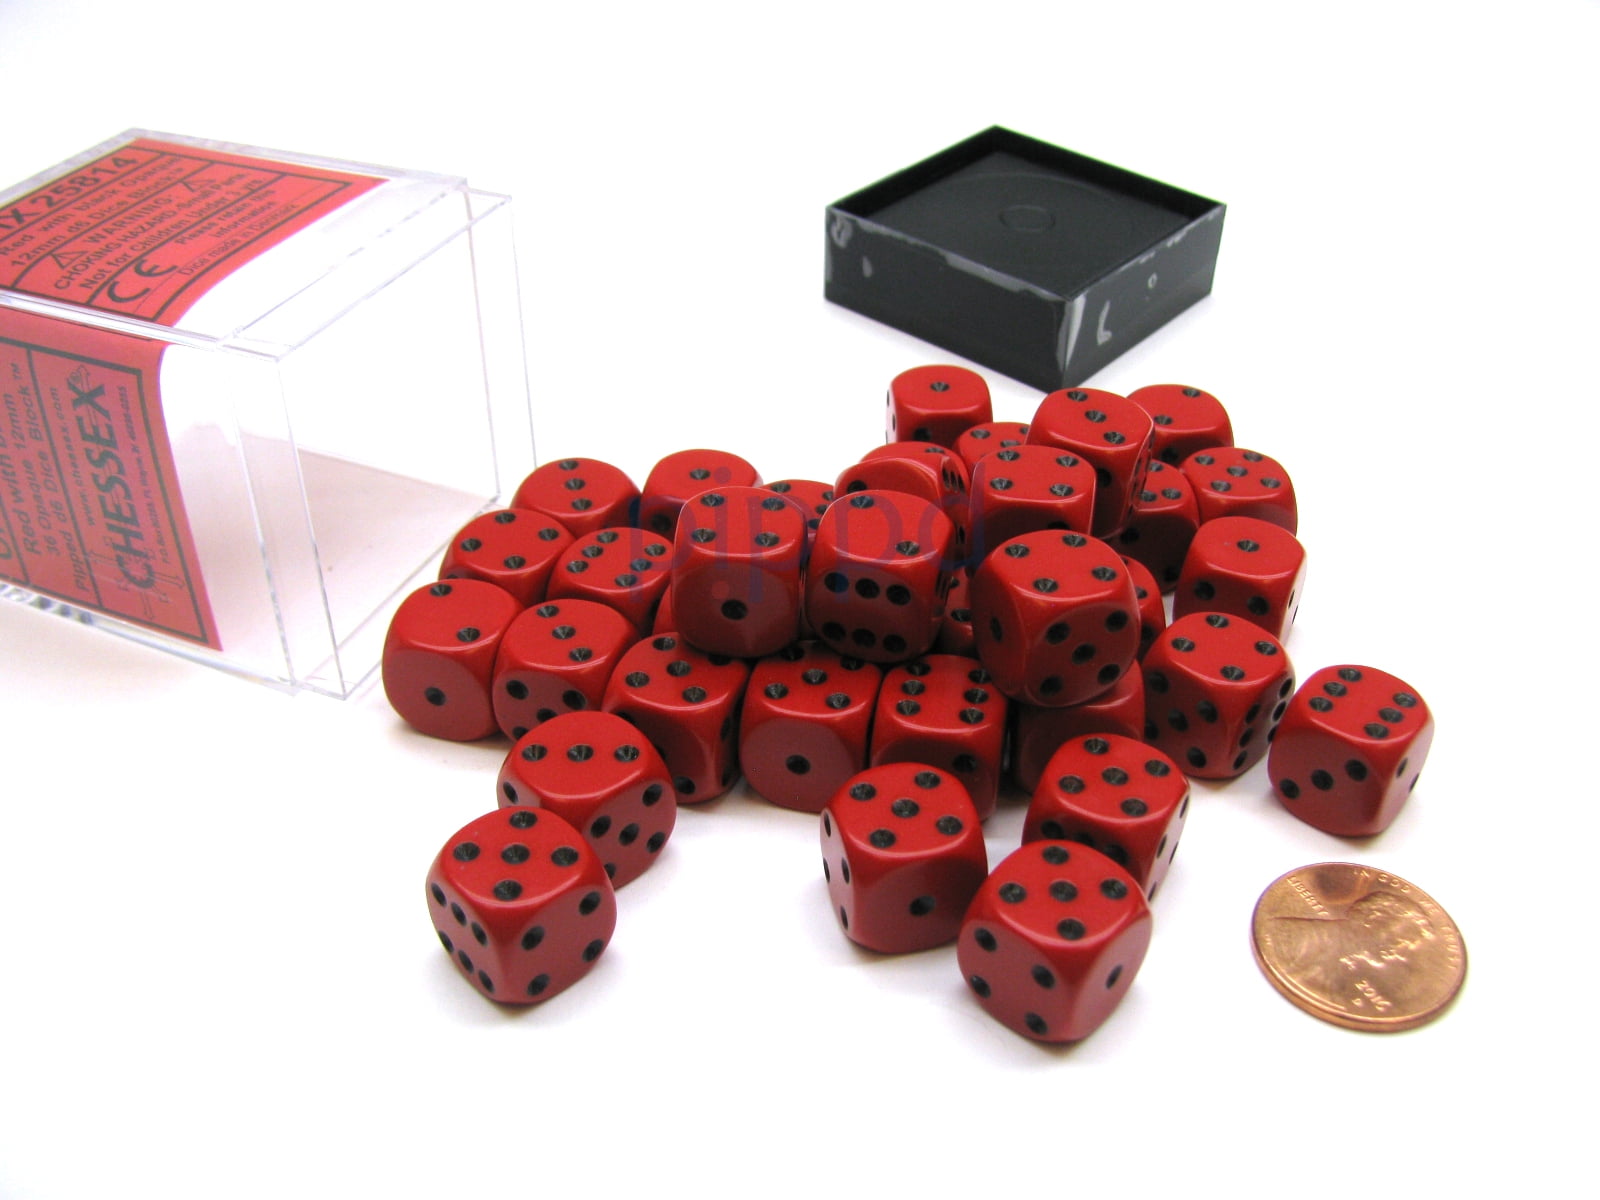 36 Die Black with Red Pips Opaque 12mm D6 Chessex Dice Block 